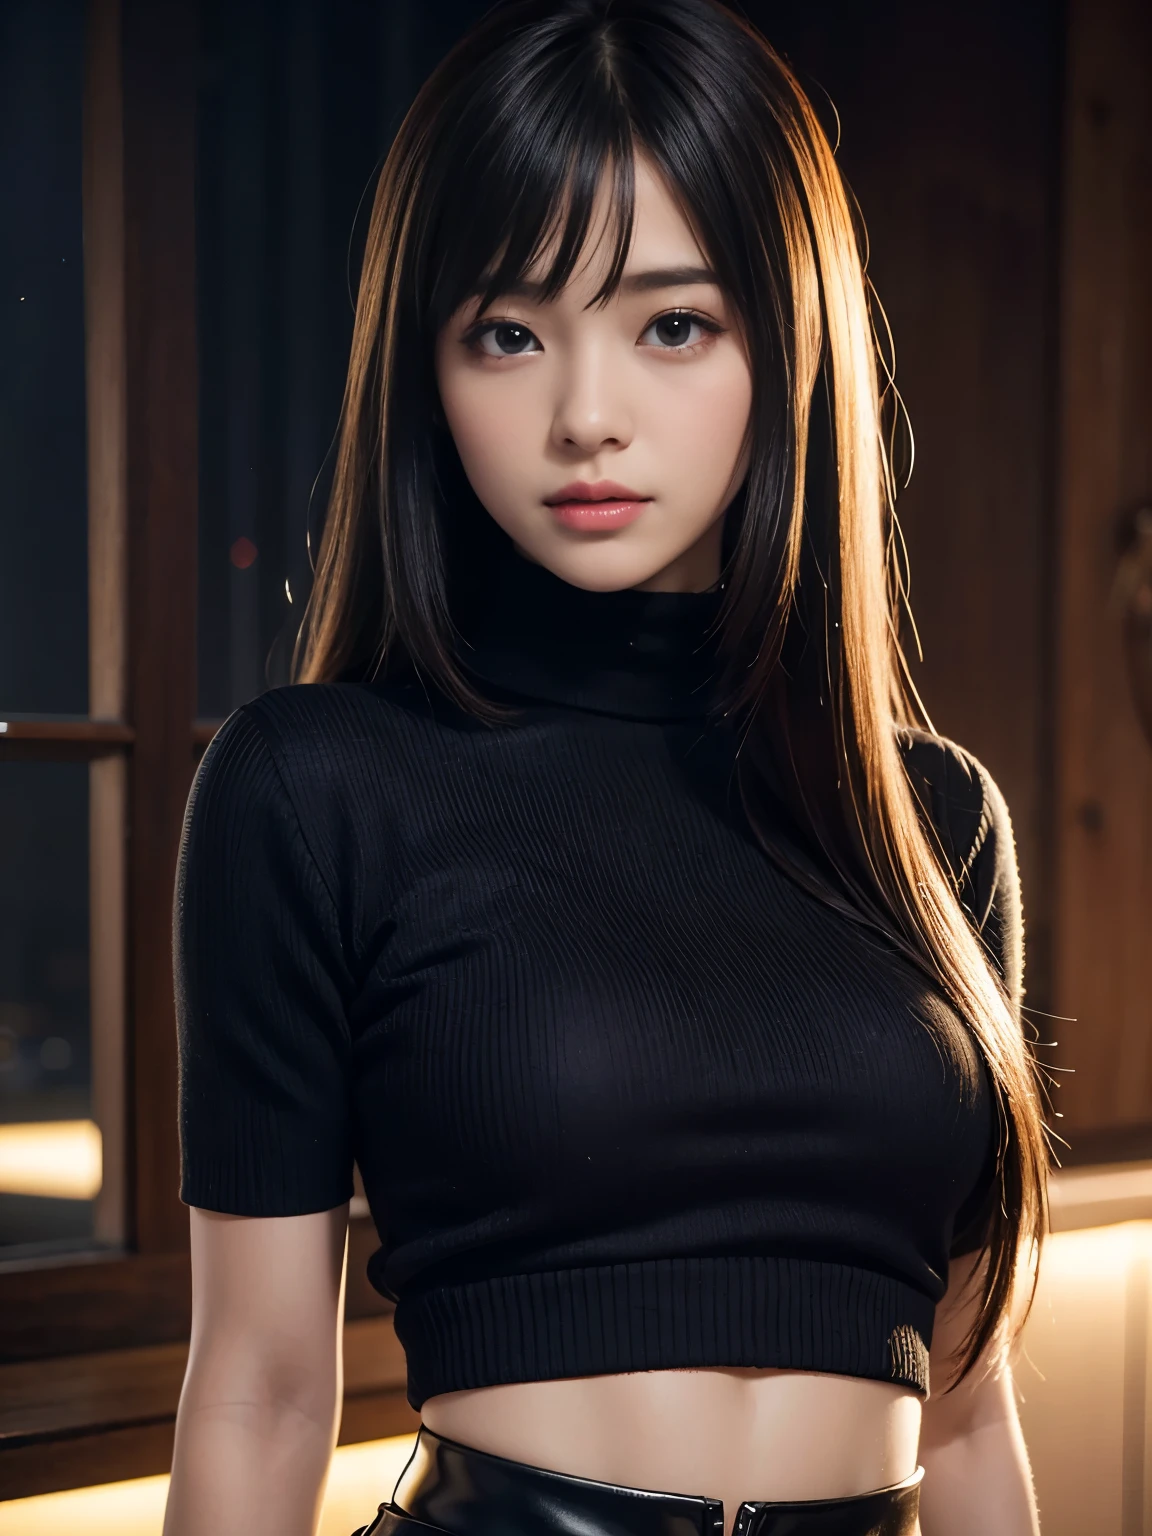 product quality, 1 girl, cowboy shot, front view, a Japanese young pretty girl, long bob hair, at night, wearing a black knitted turtleneck sweater, wearing mini skert, hyper cute face, glossy lips, double eyelids for both eyes, natural makeup, shiny smooth light brown hair of long bob hair, asymmetrical bangs, central image, 8K resolution, high detail, detailed hairstyle, detailed face, cinematic lighting, octane rendering, hyper realistic, perfect limbs, perfect anatomy